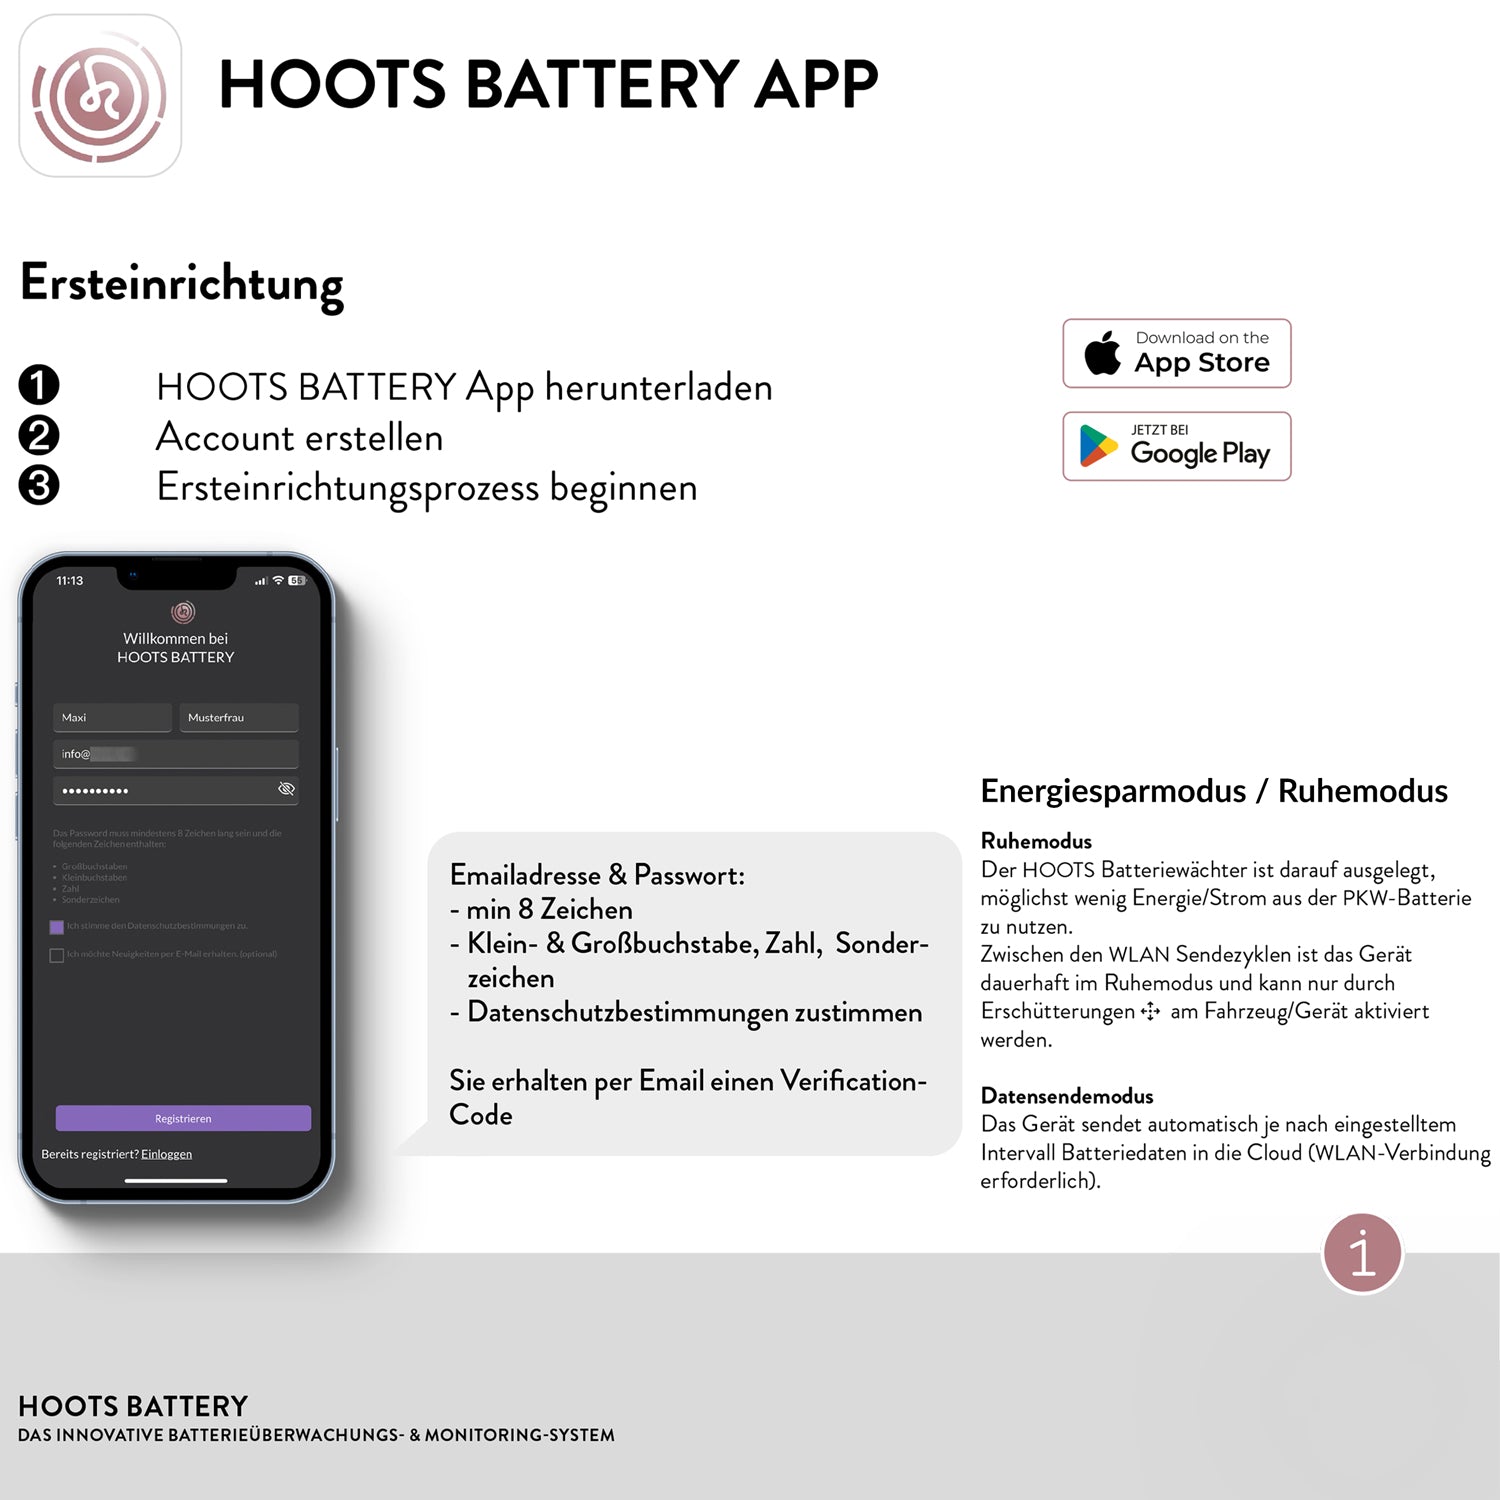 HOOTS BATTERY WiFi battery monitor for remote monitoring